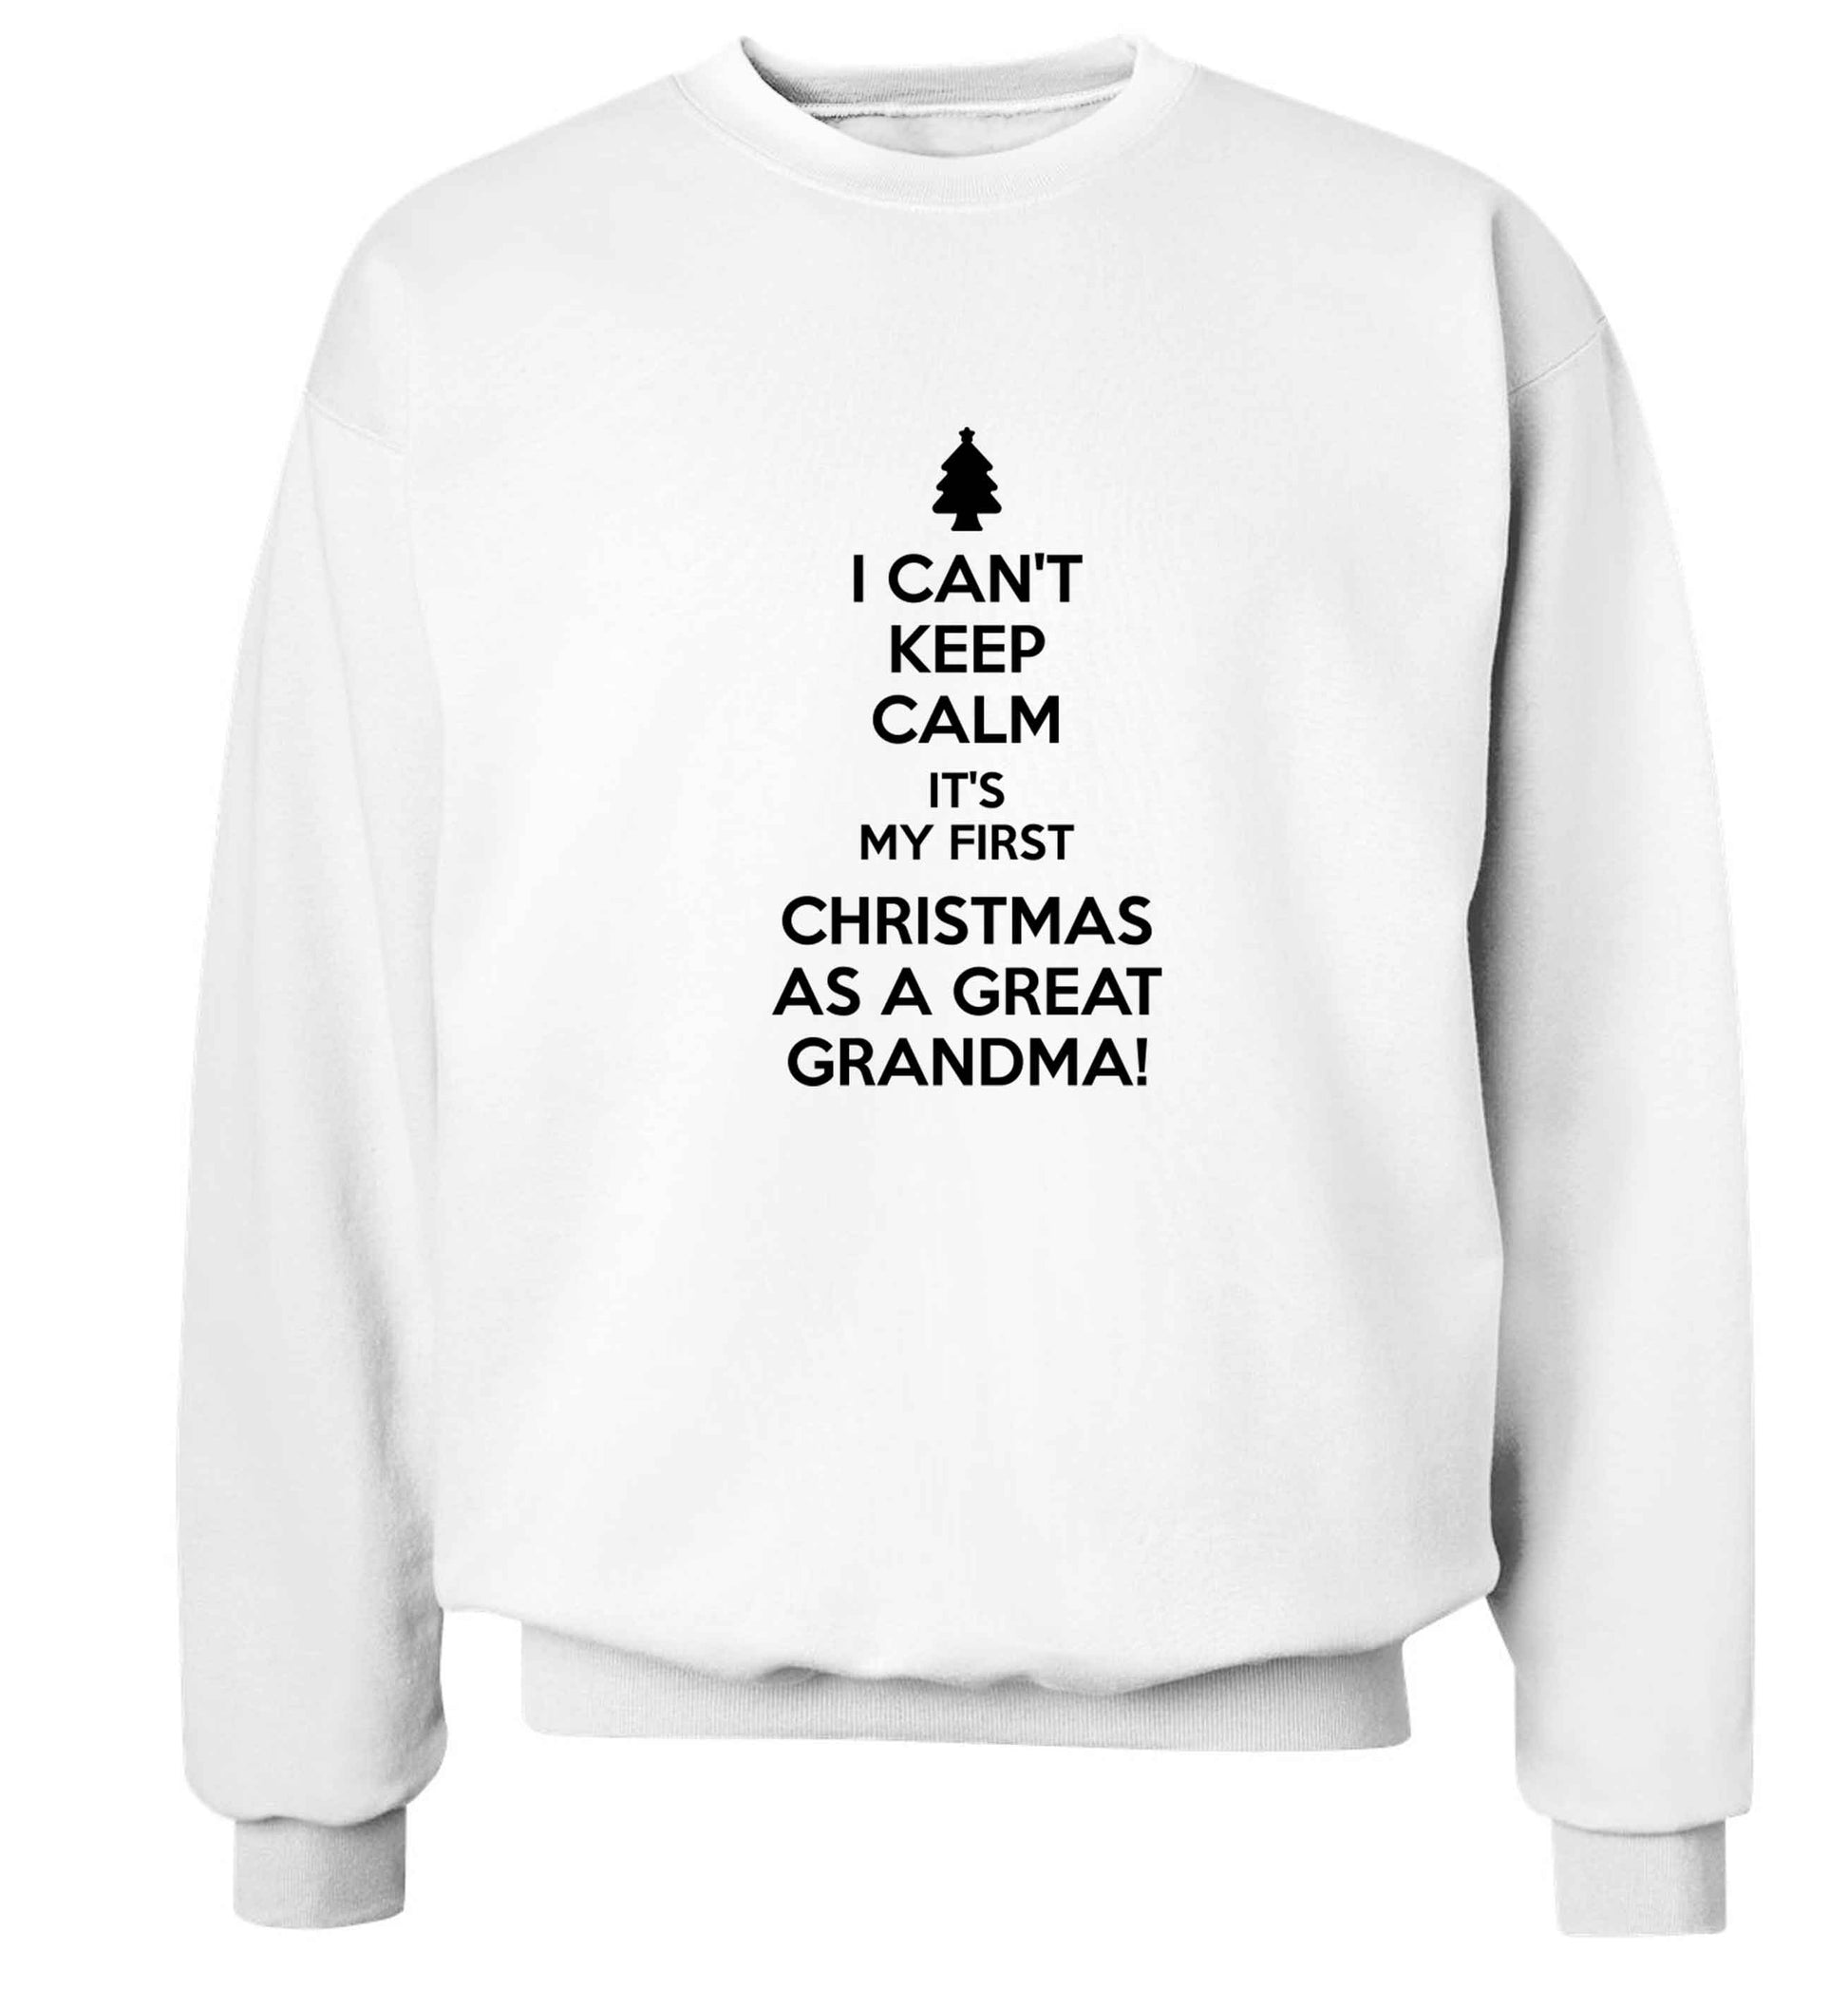 I can't keep calm it's my first Christmas as a great grandma! Adult's unisex white Sweater 2XL